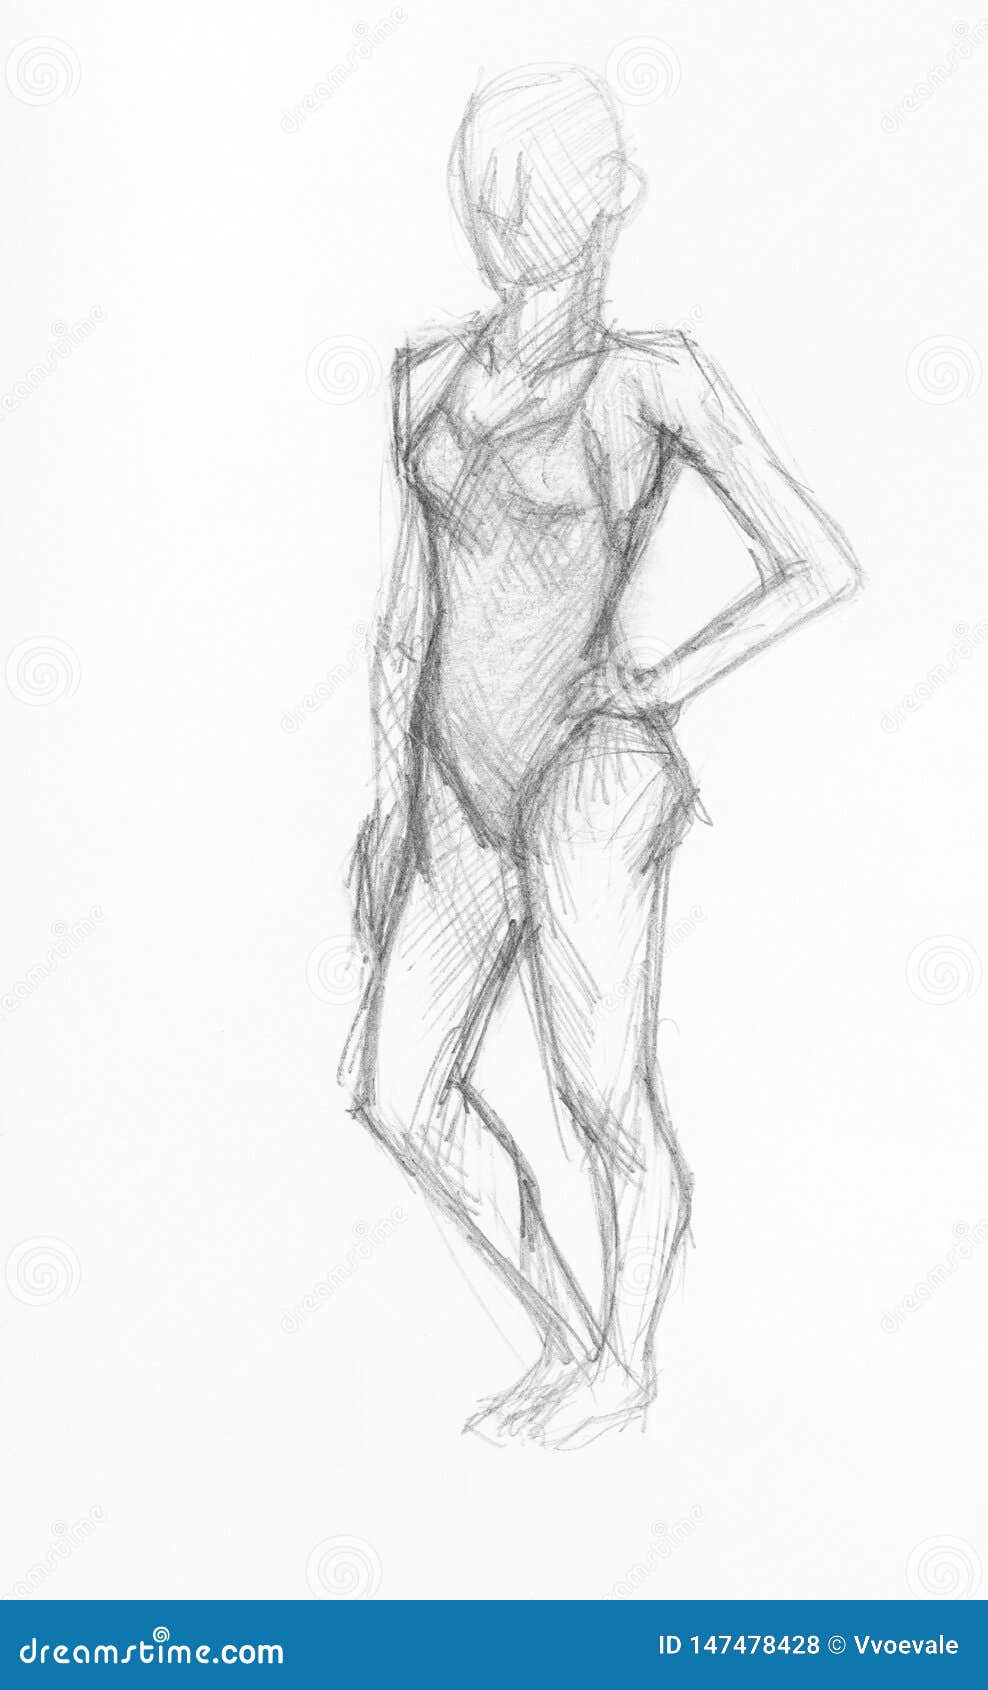 Figure drawing in pencil stock illustration. Illustration of female -  48258149